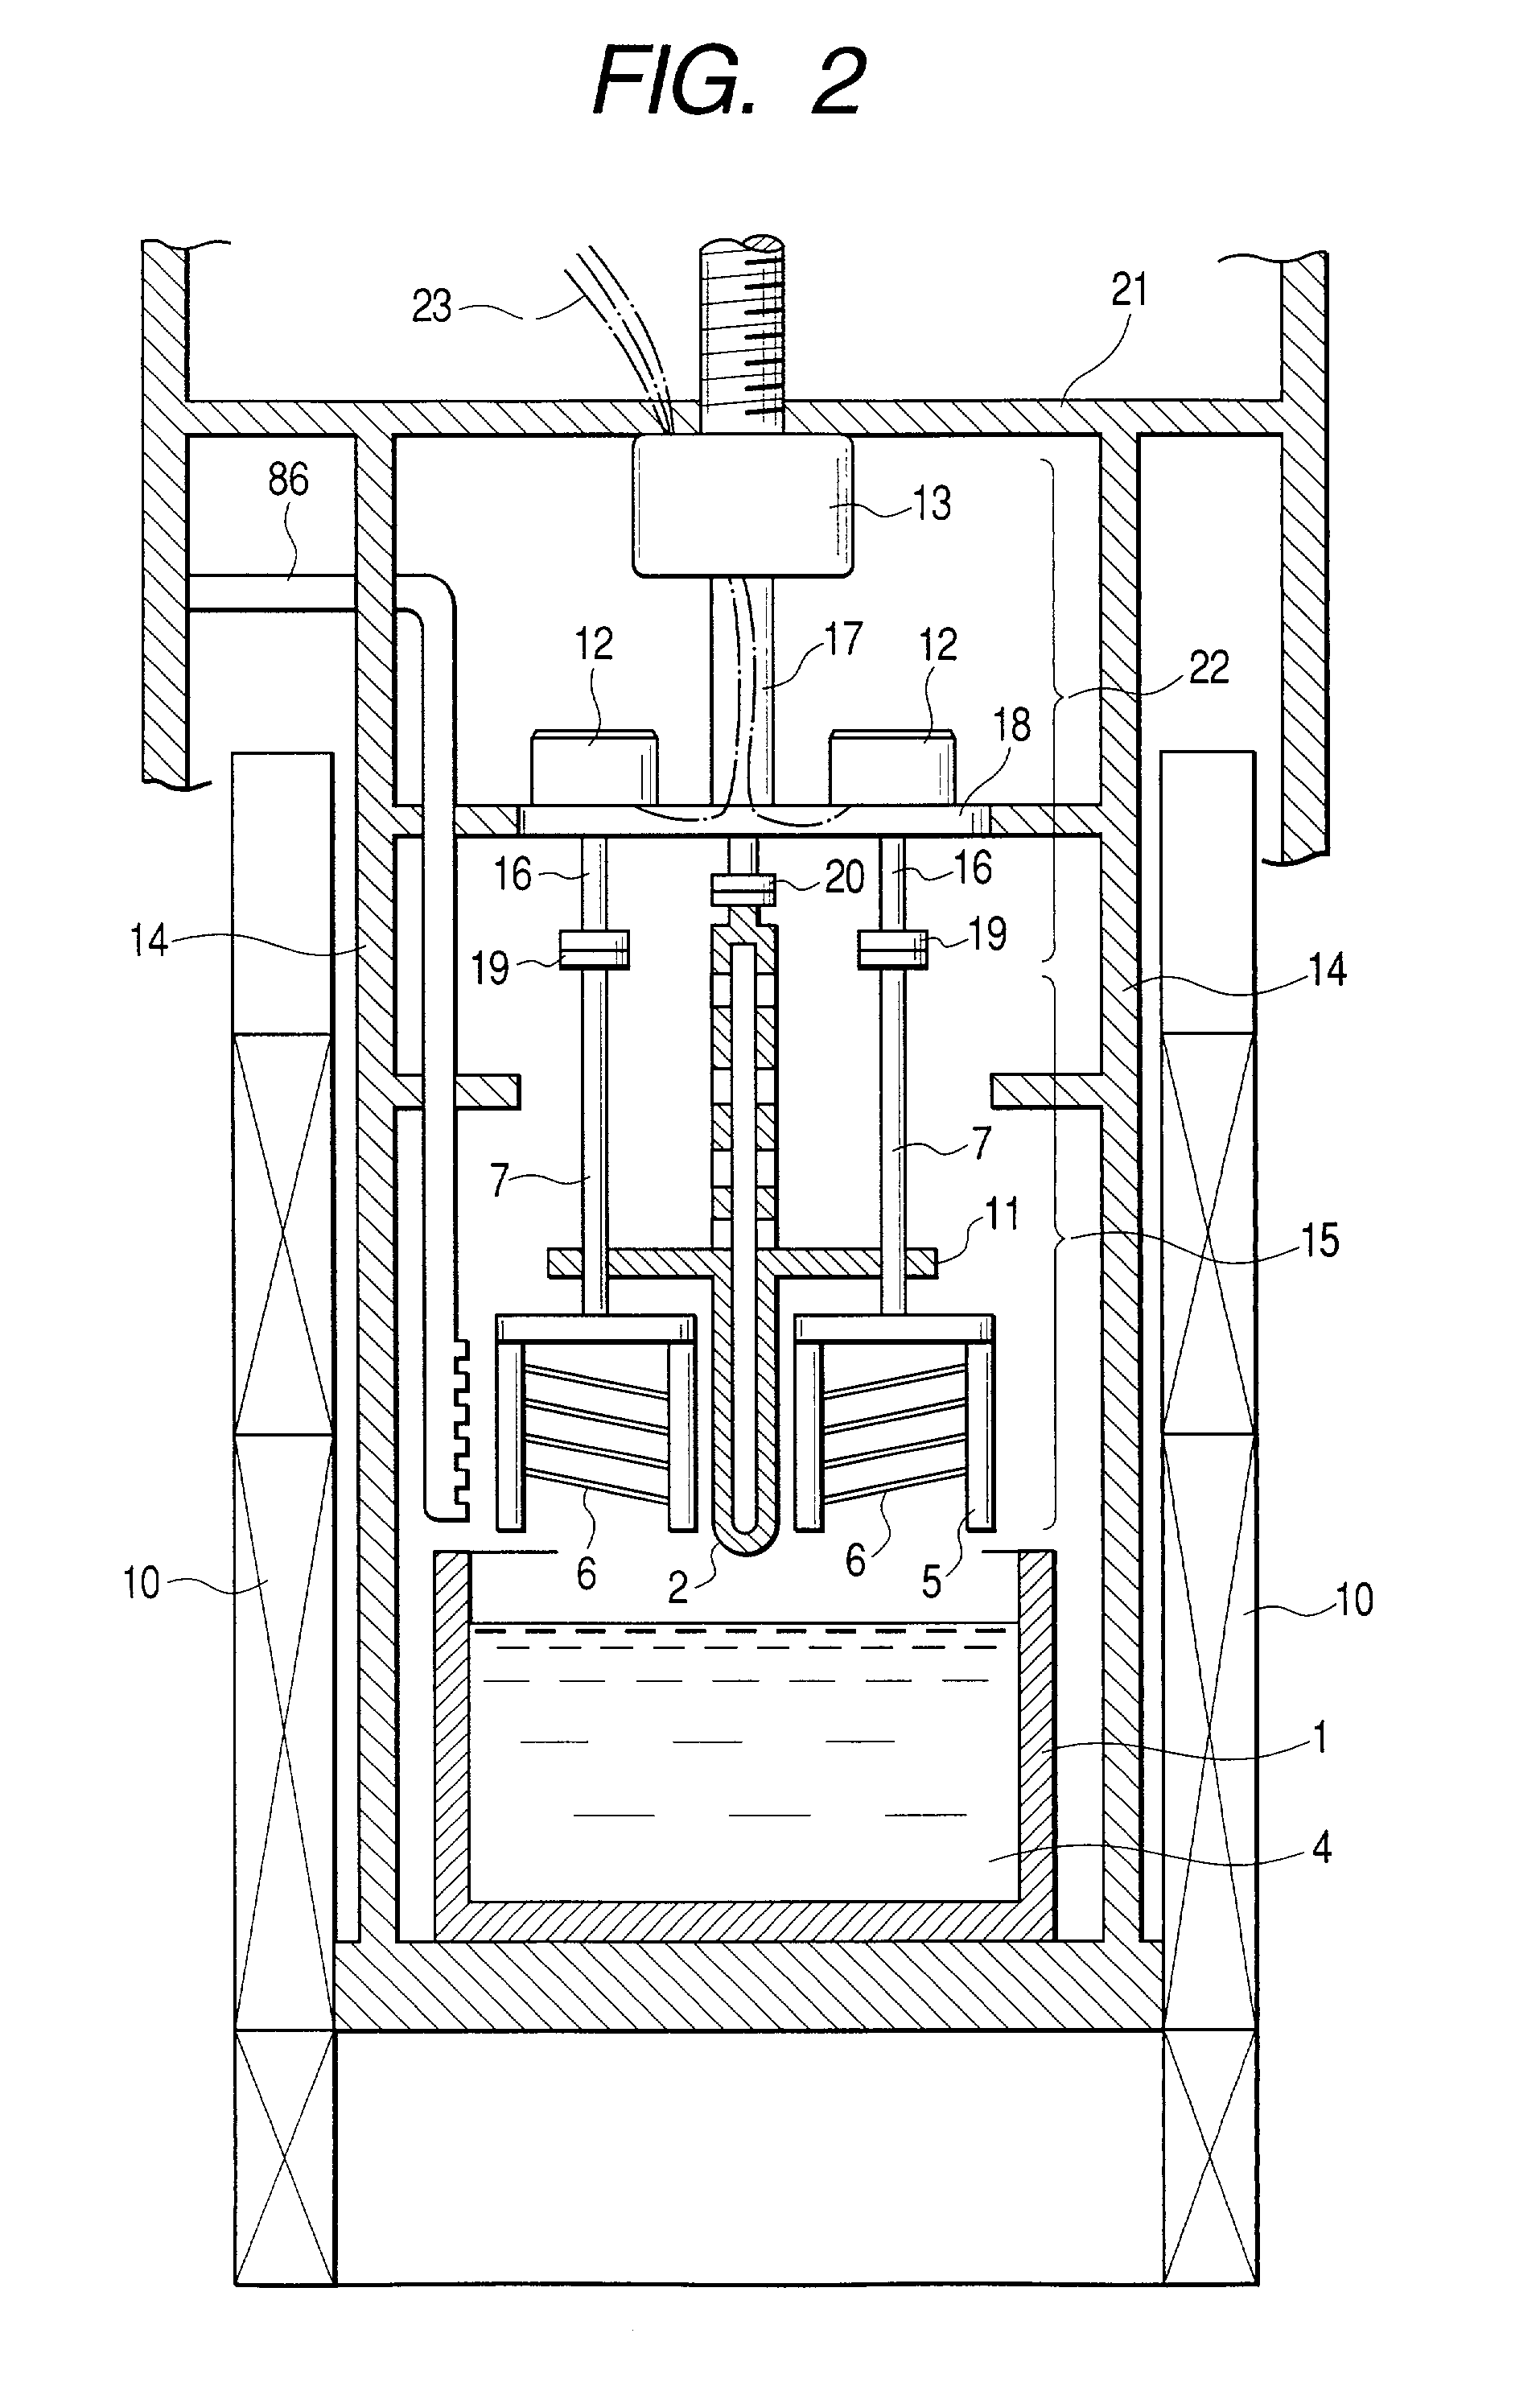 Liquid phase growth methods and liquid phase growth apparatus